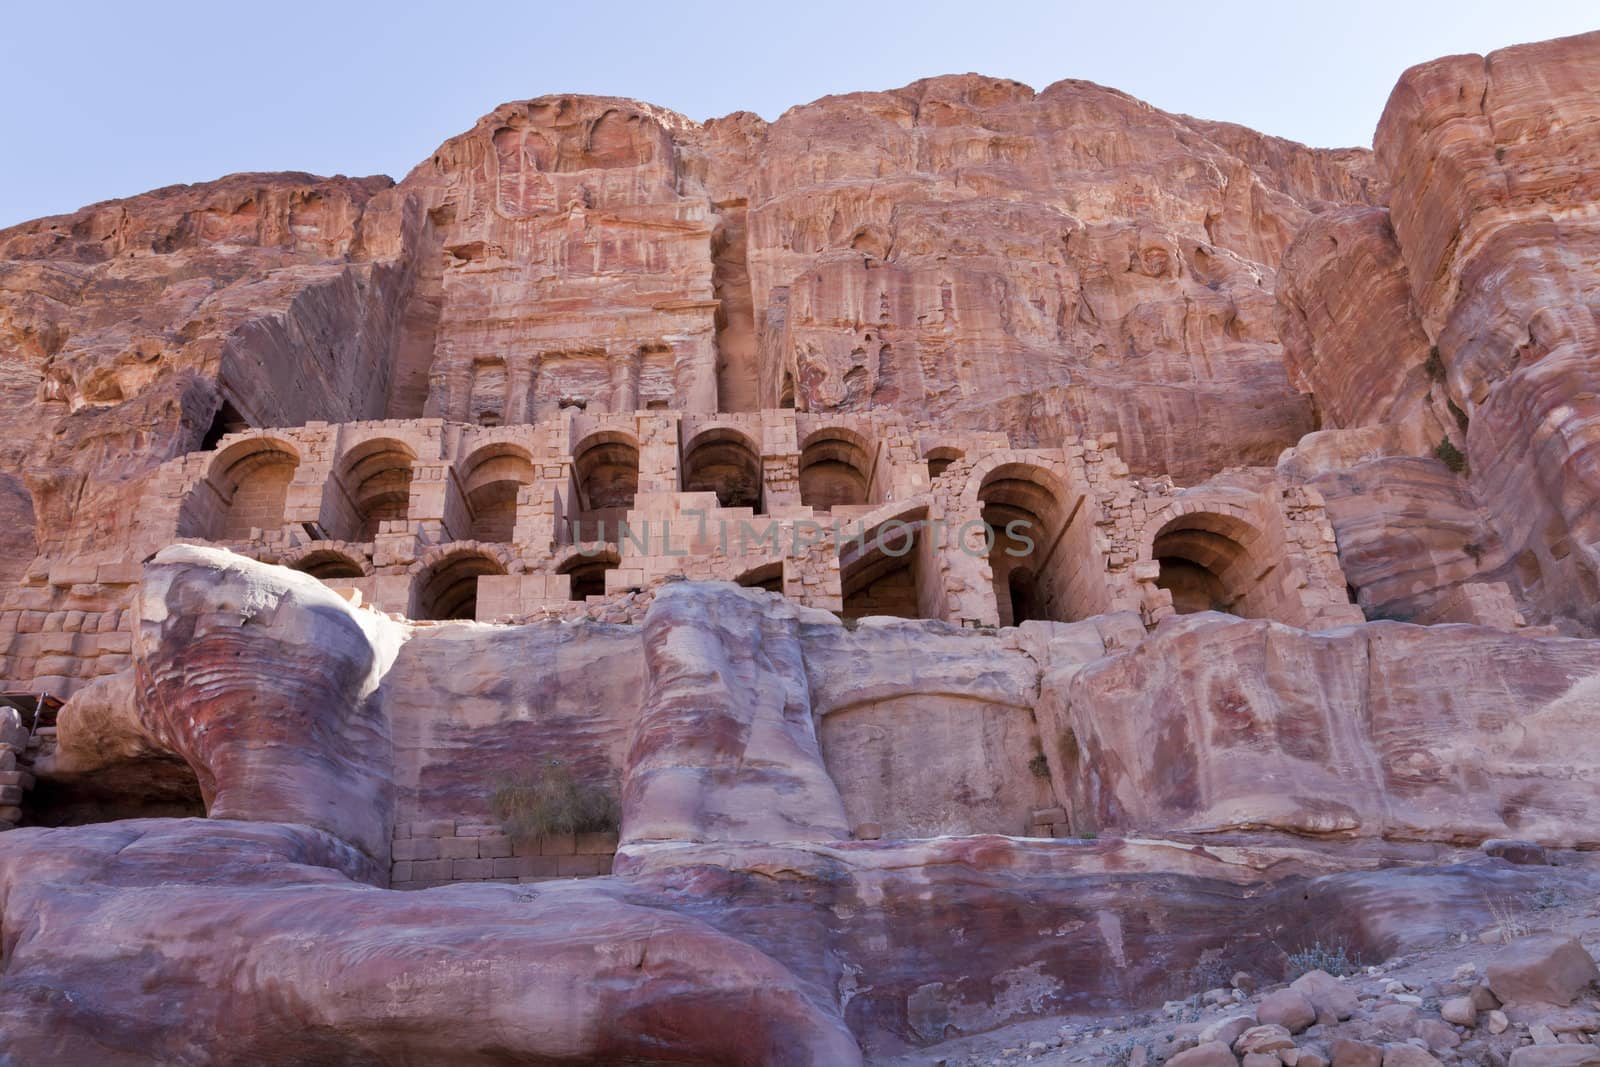 urn tomb, one of the hellenistic style facades in petra, jordan